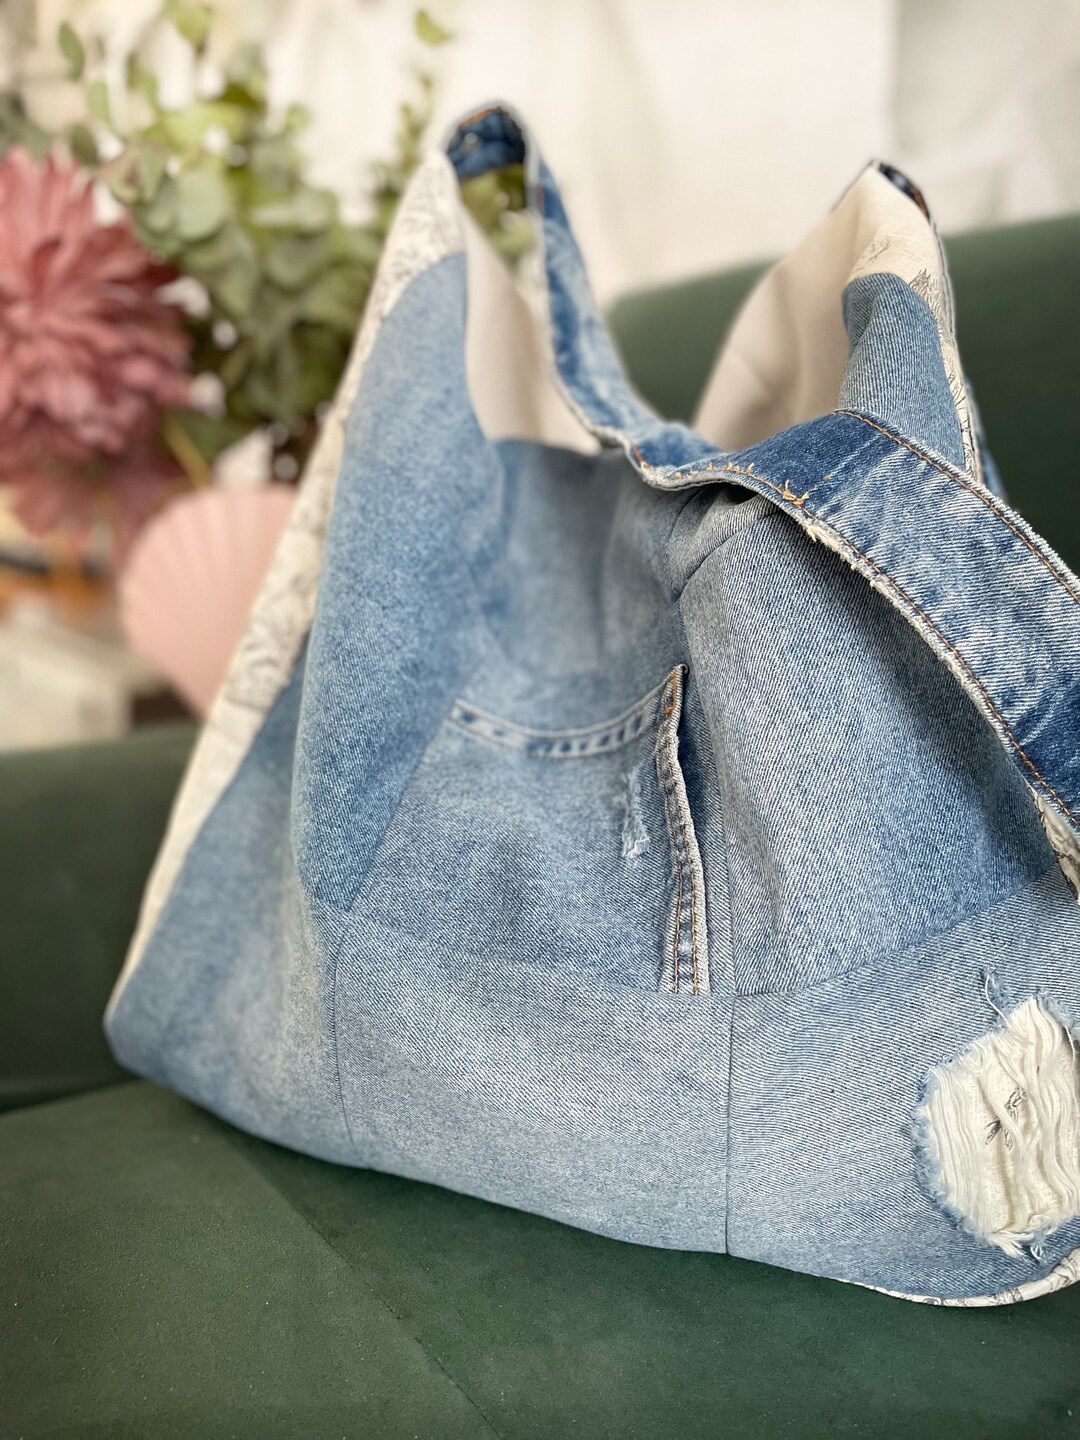 Tutorial: Remake your old jeans into a crossbody bag – Sewing